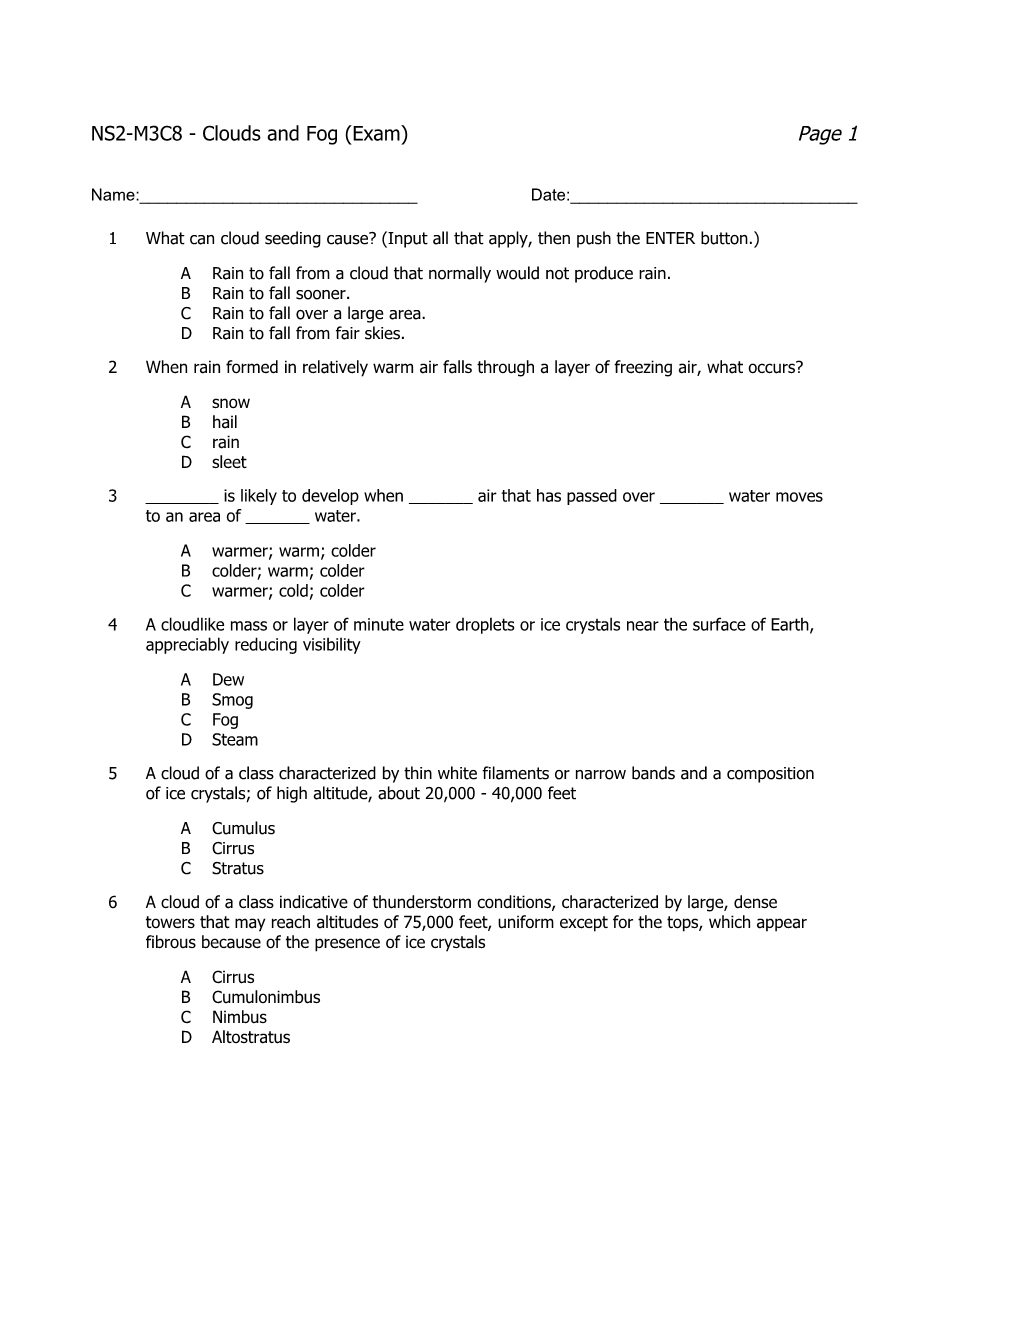 NS2-M3C8 - Clouds and Fog (Exam) Page 1